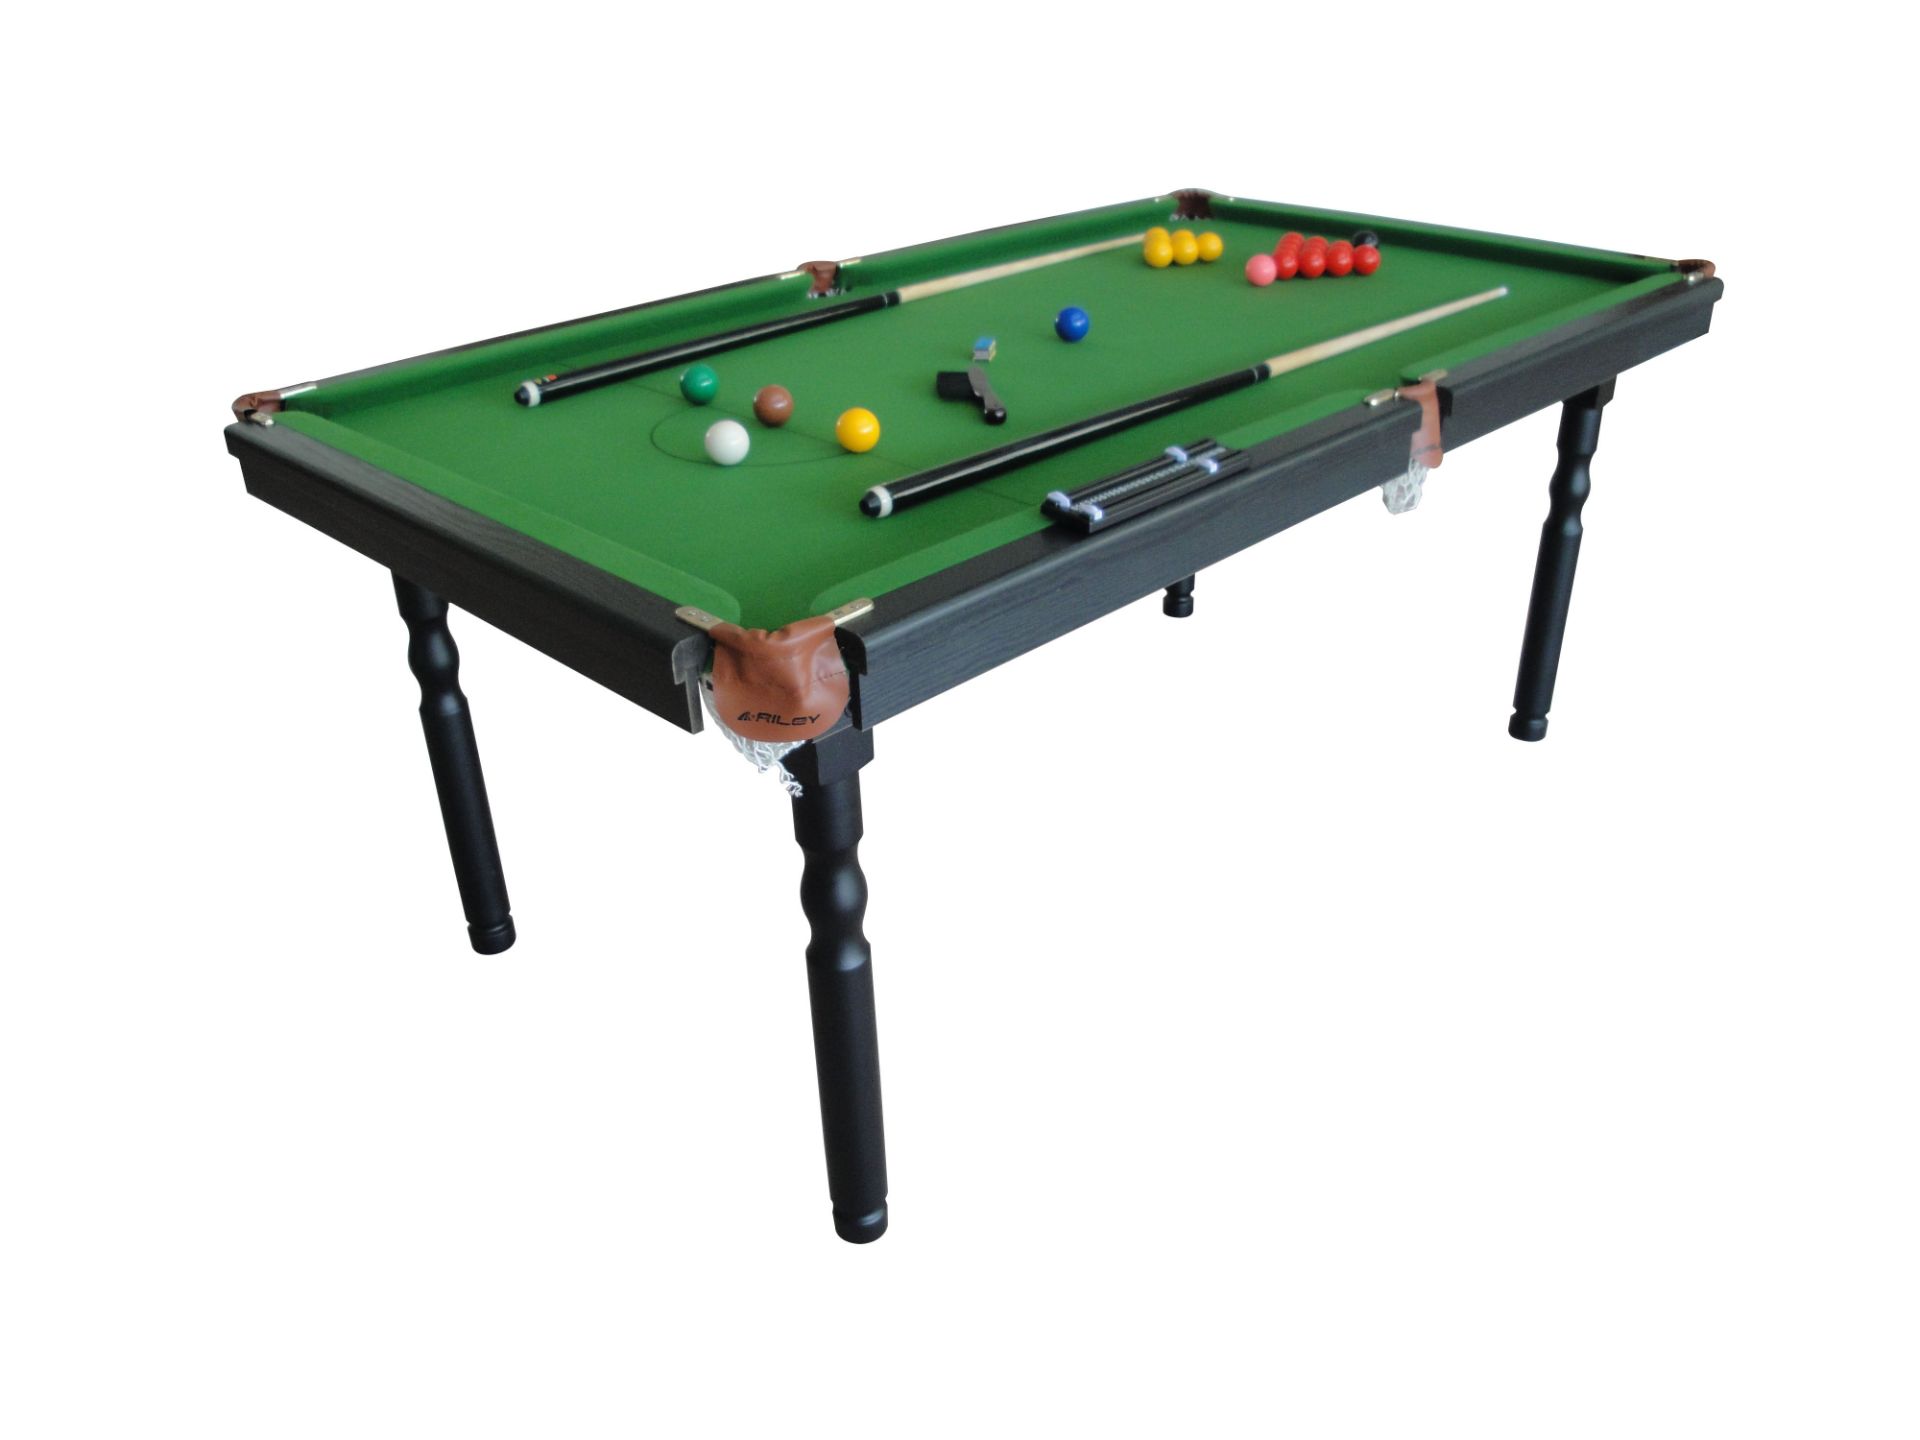 6 x 4 Snooker Table ( New & Boxed ) Complete With Balls, Cues, Triangle etc - Image 2 of 3